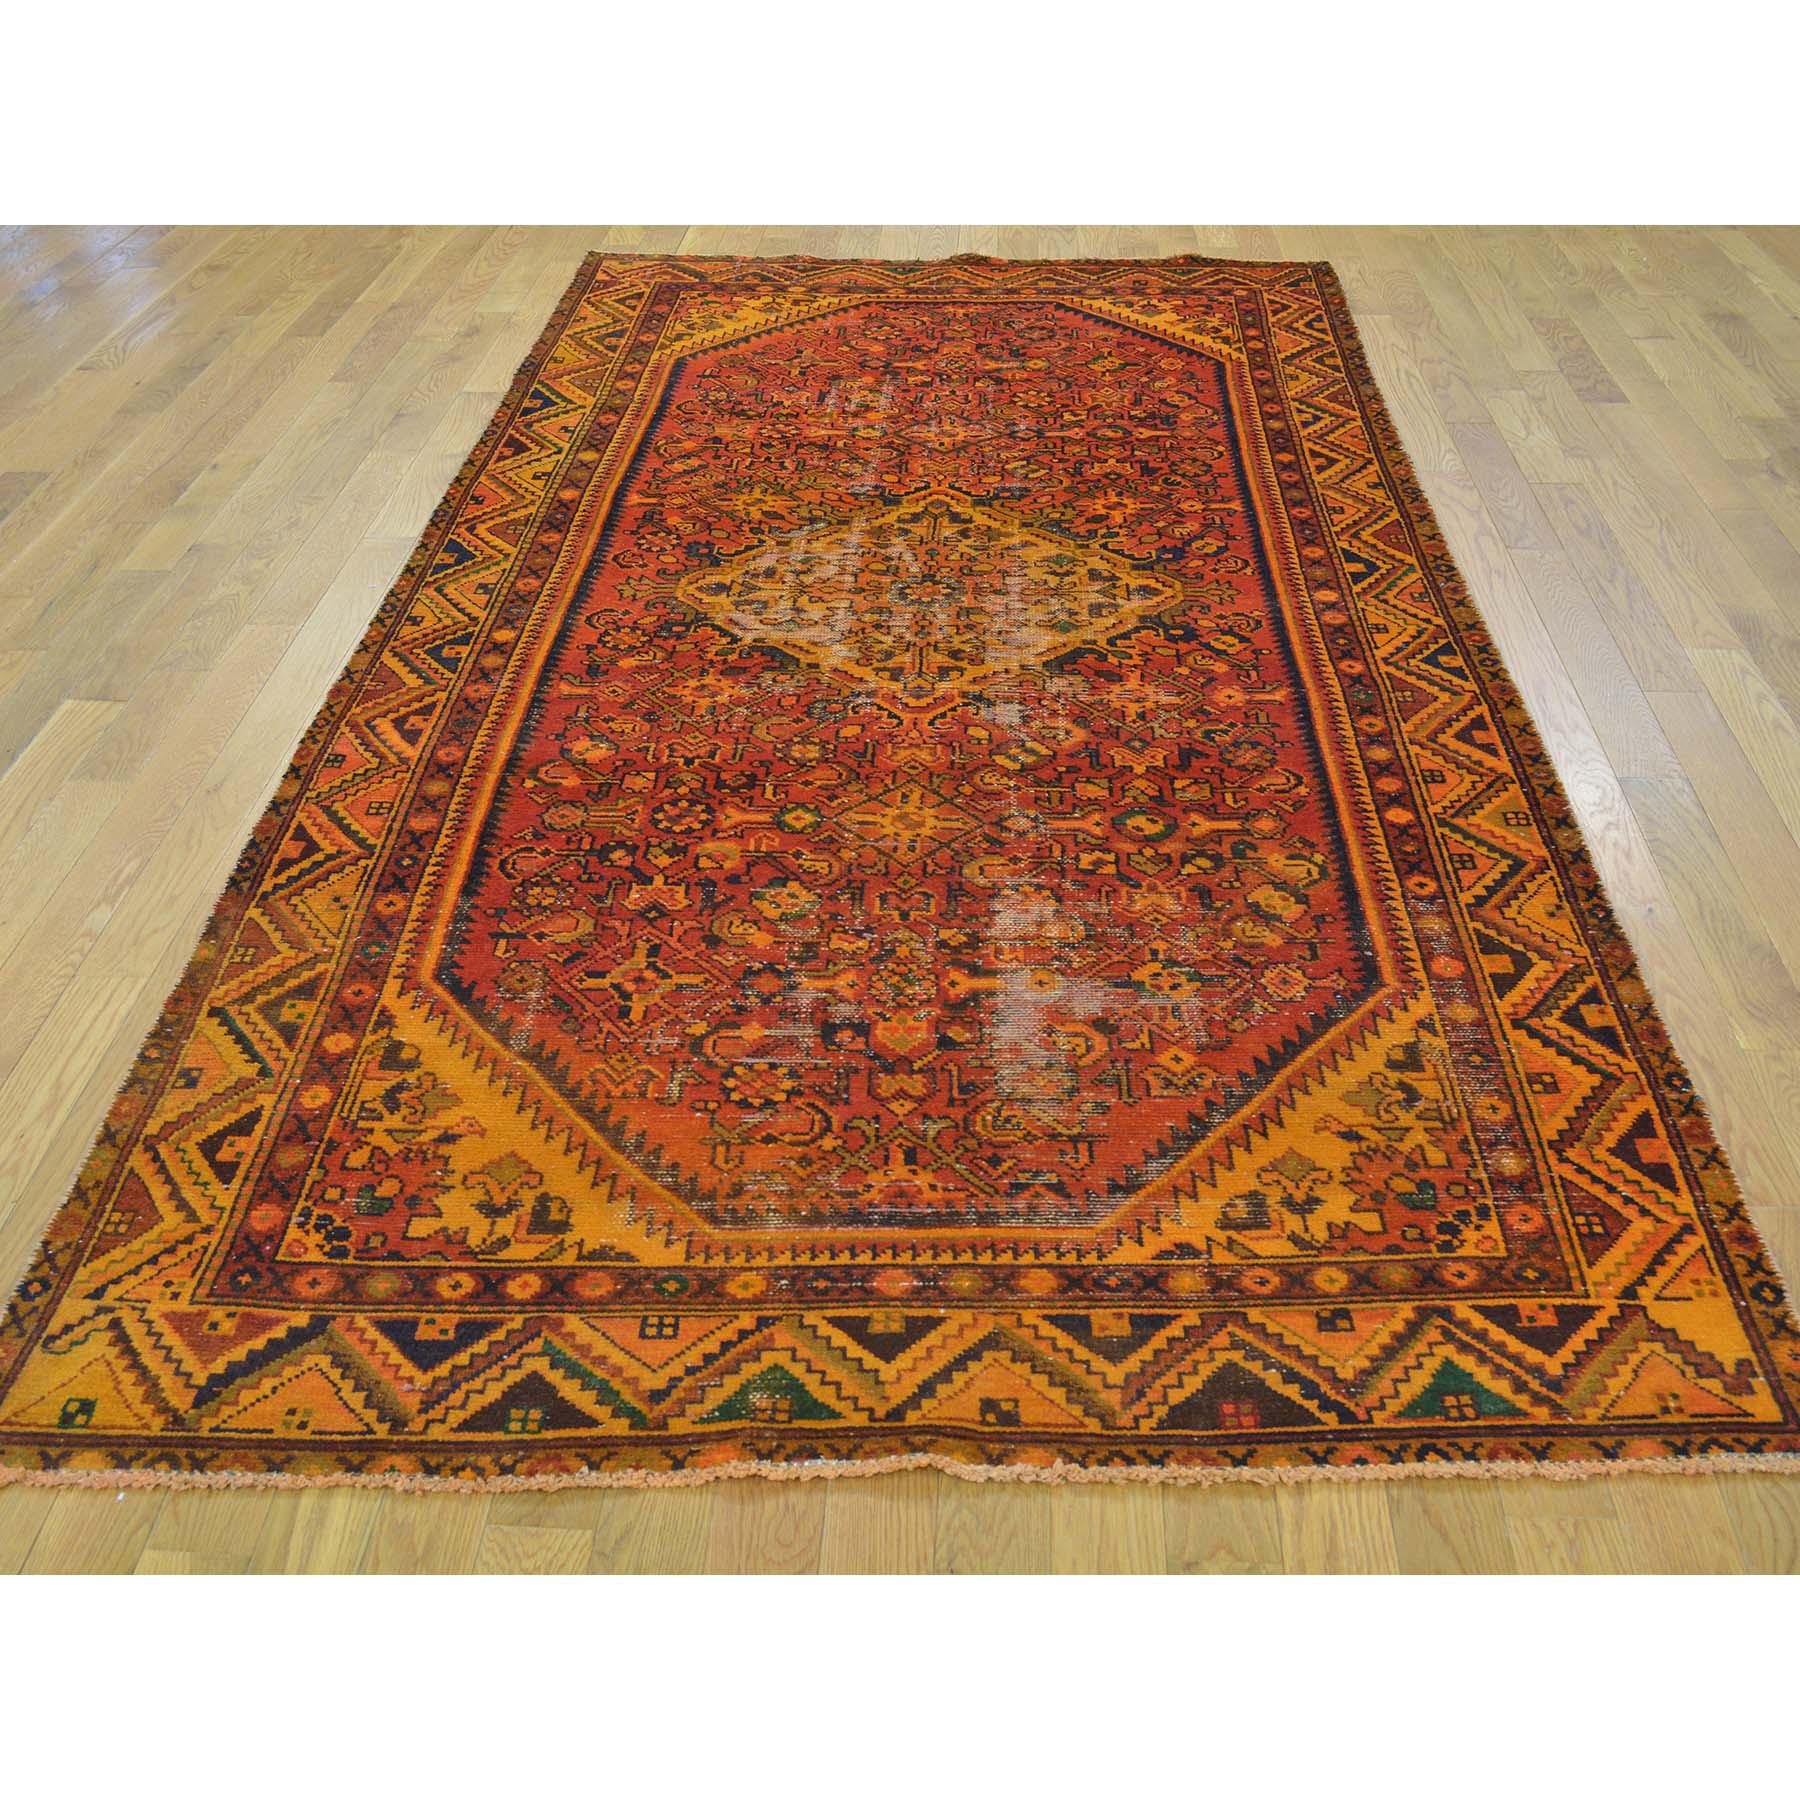 This is a truly genuine one-of-a-kind Semi Antique Persian Hamadan Wide Runner Overdyed Vintage Rug. It has been knotted for months and months in the centuries-old Persian weaving craftsmanship techniques by expert artisans.

 Primary materials: